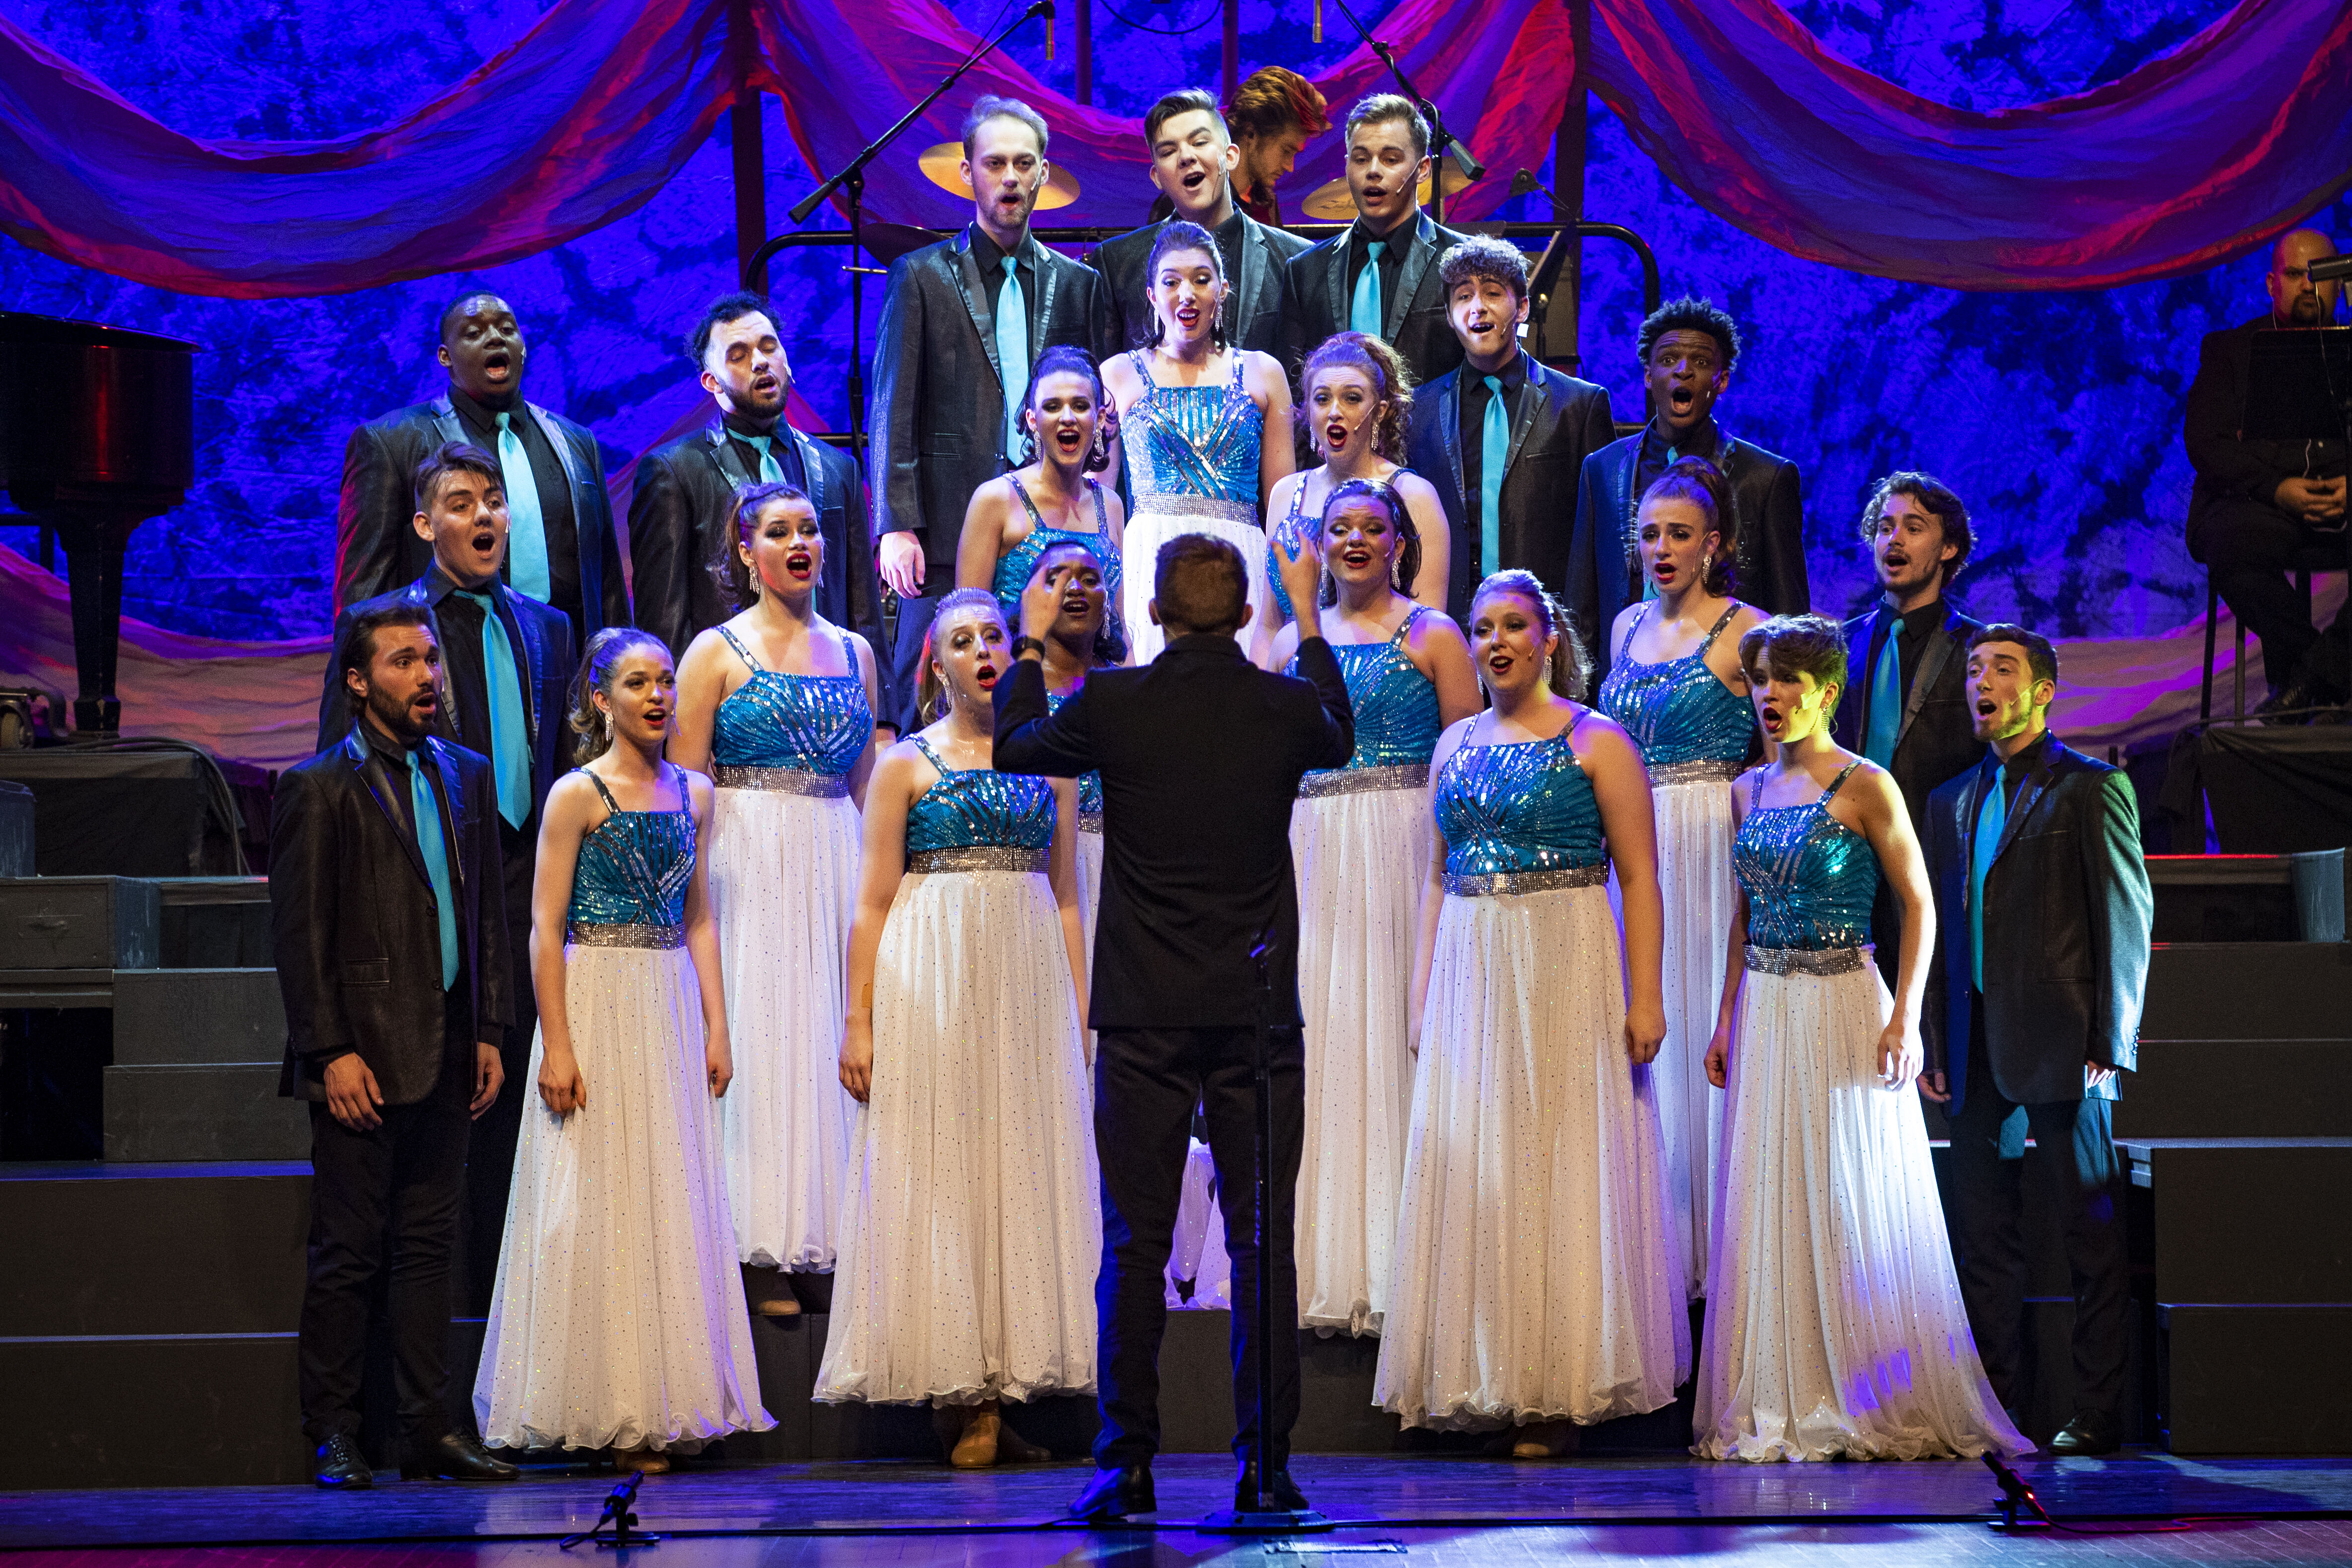 The University Singers perform onstage during their annual Spectacular